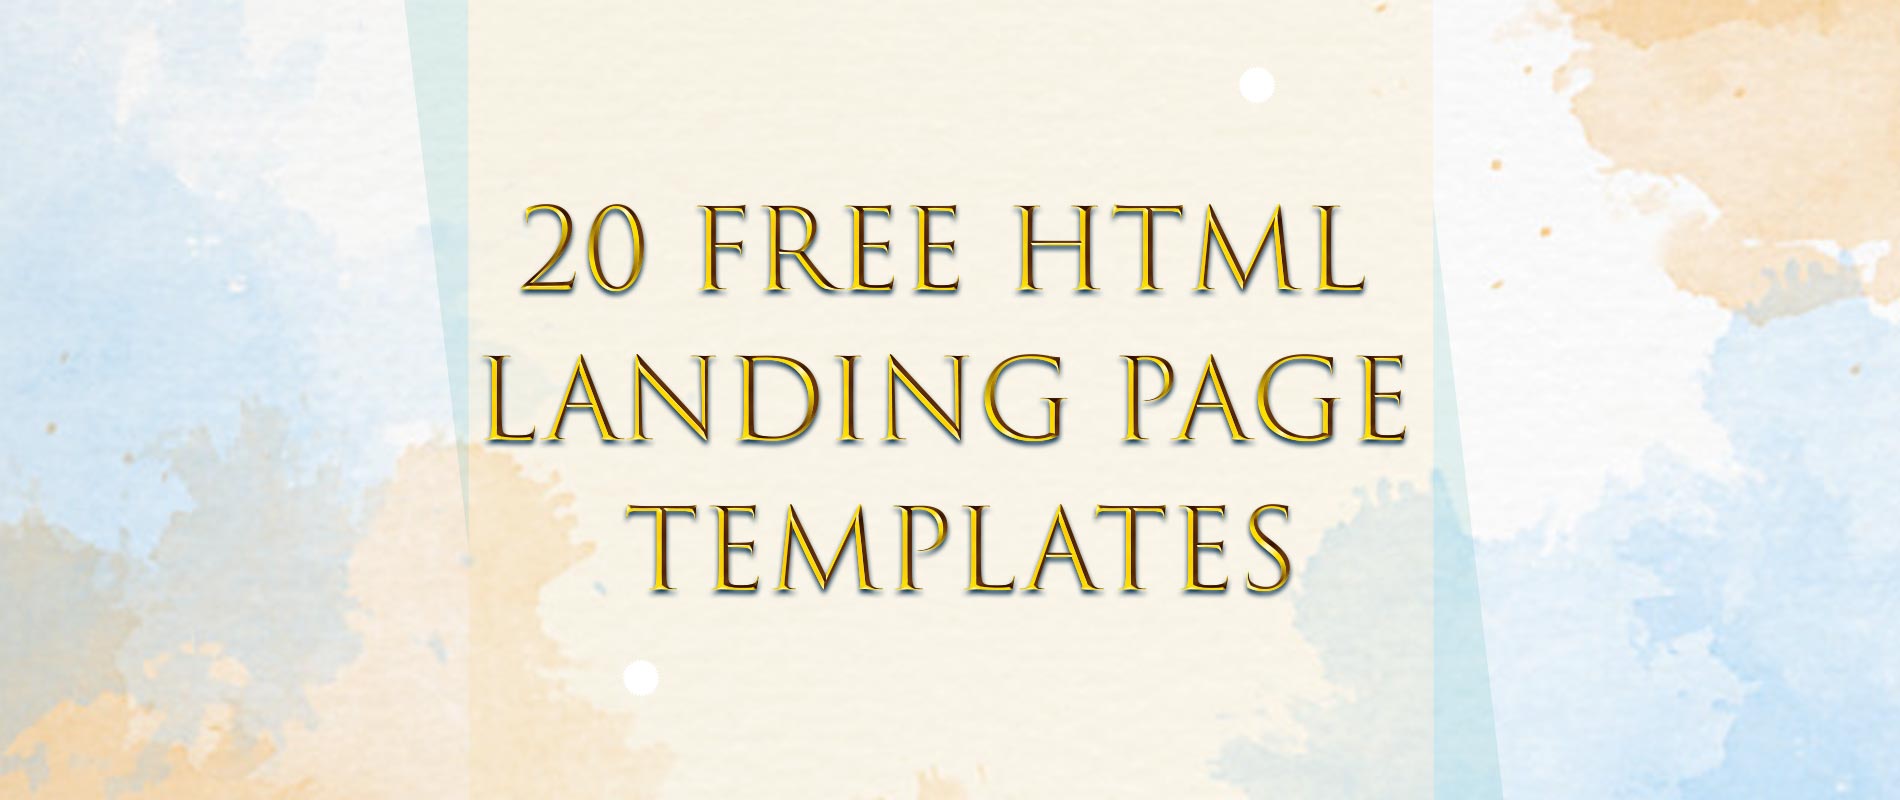 20 Free Html Landing Page Templates Codes And Design